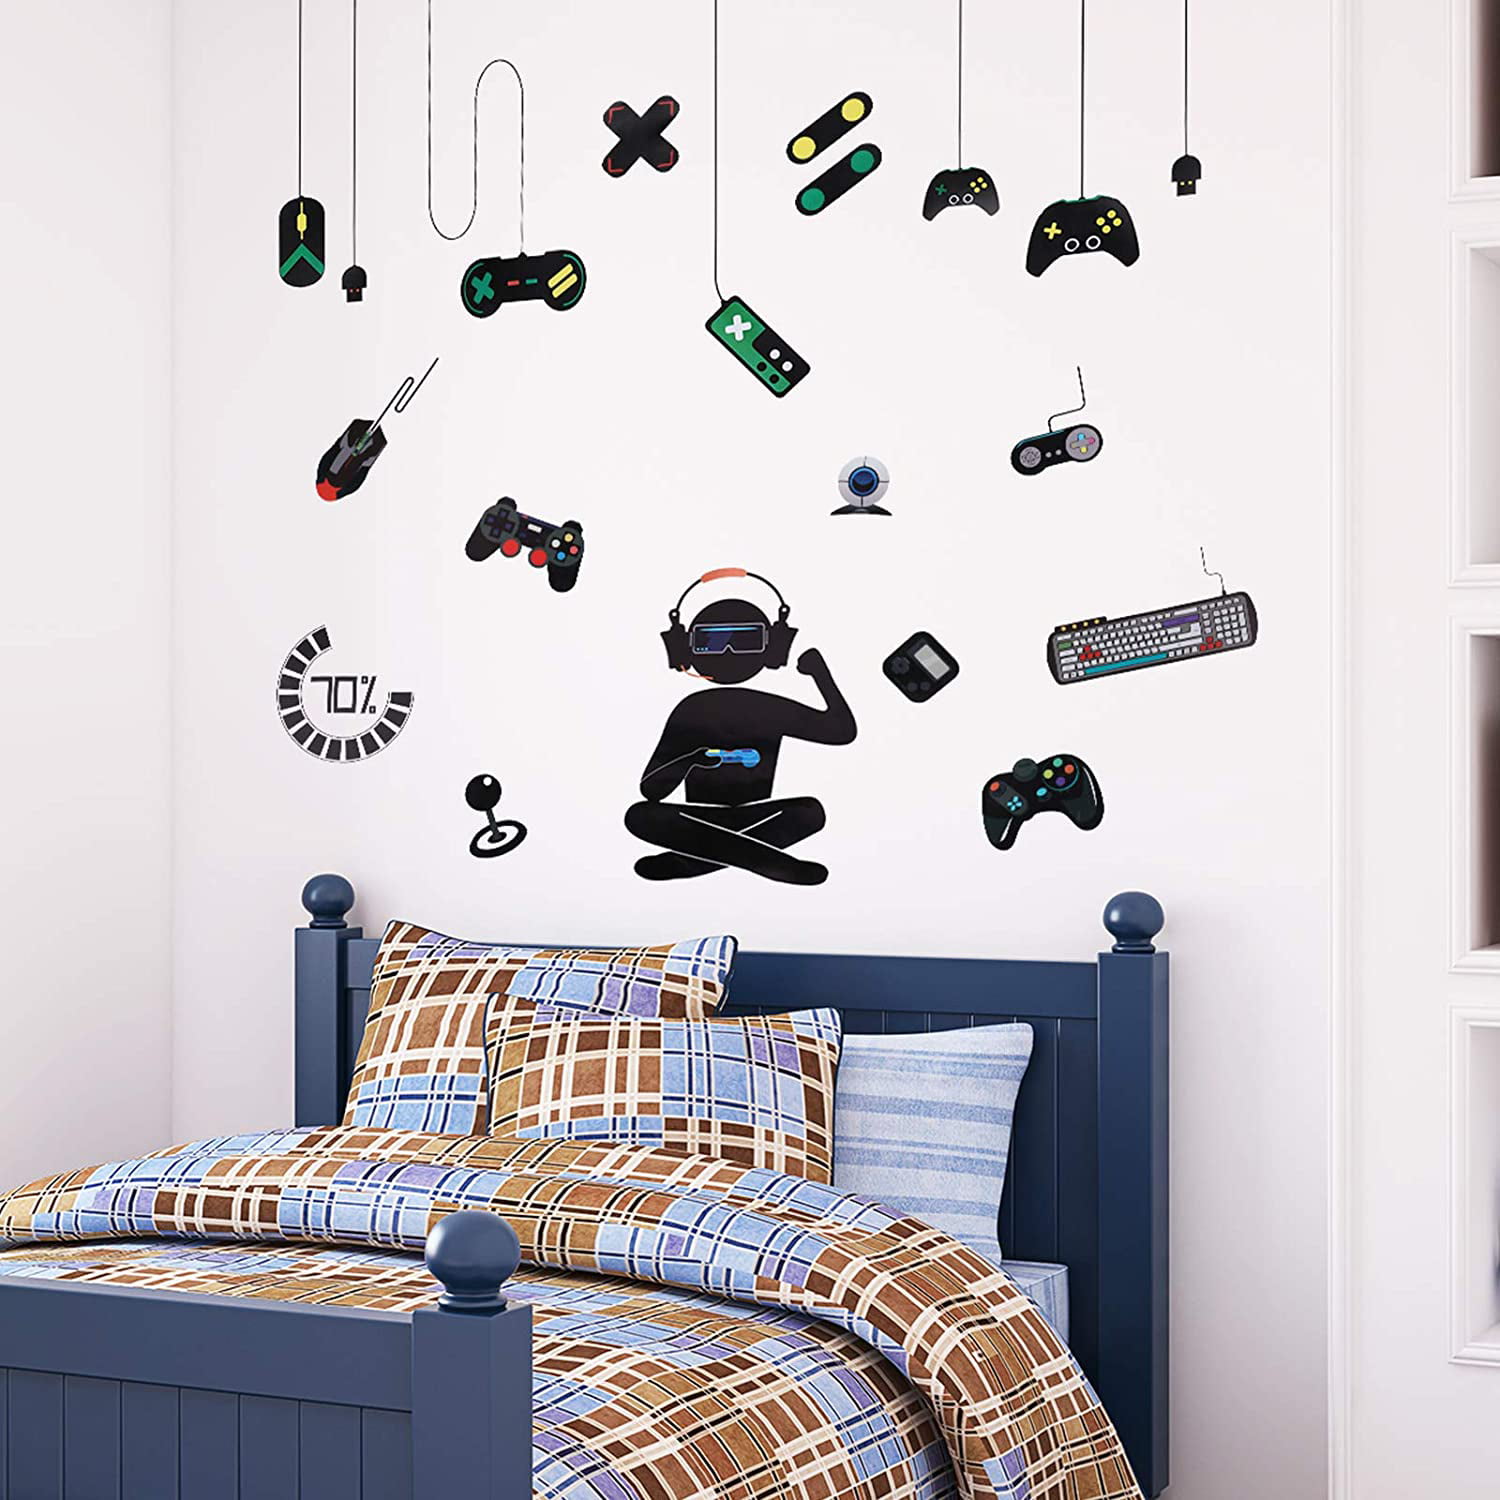 Boys Room Decor Creative Gamer Life with Controller Wall Decal Vinyl Art Design Mural Wall Stickers for Living Room Kids Men Playroom Bedroom Video Game Room Nursery Home Decoration Wallpaper